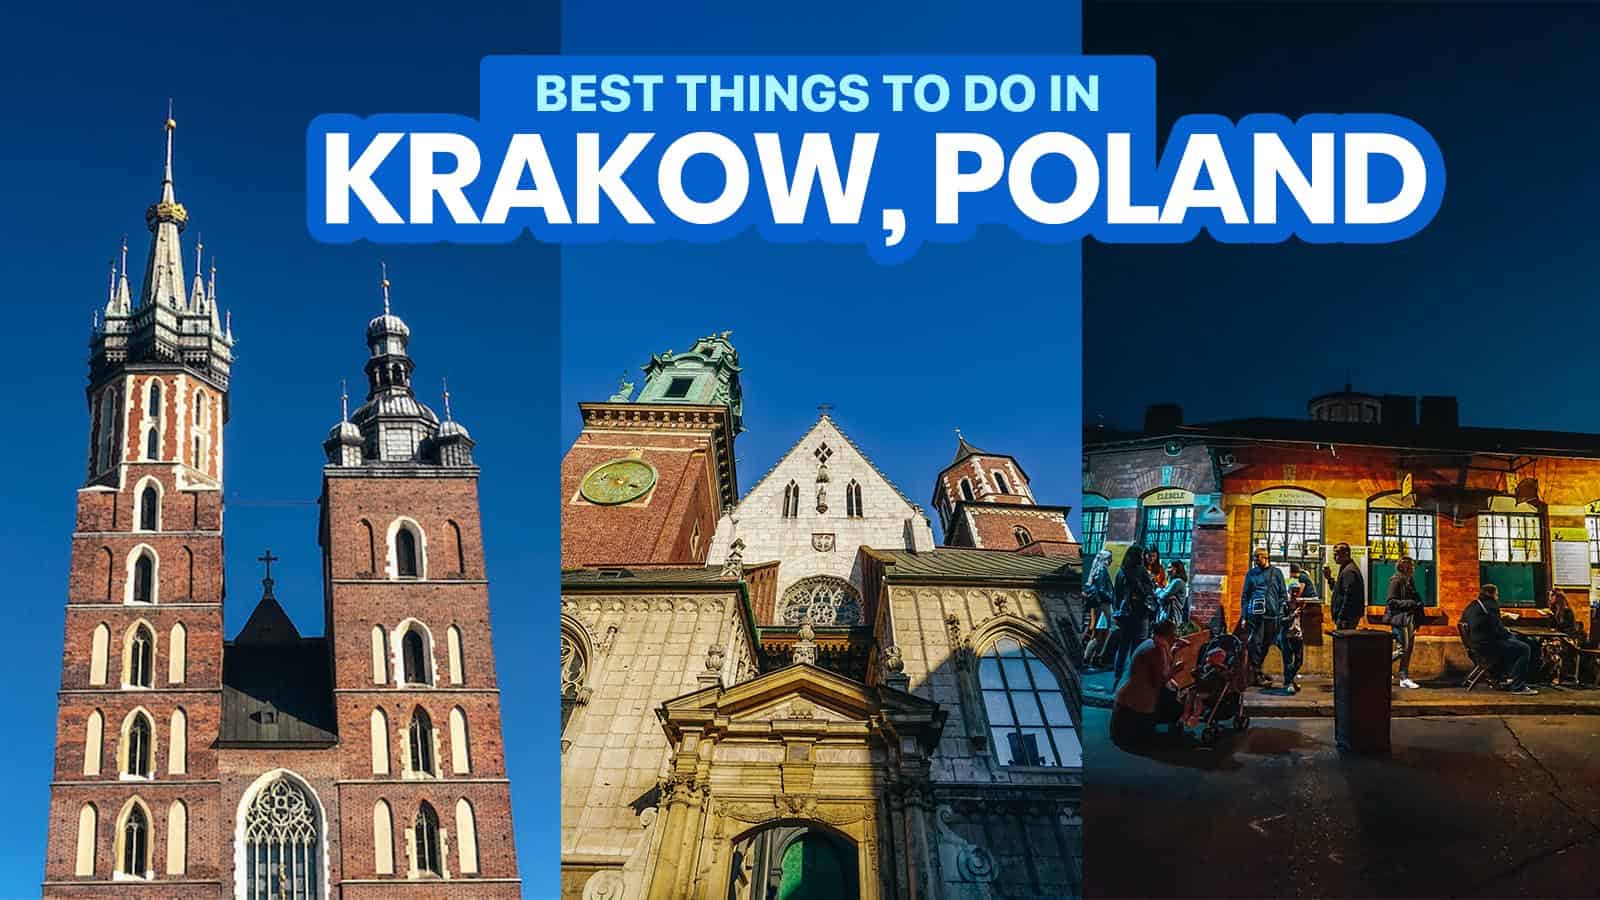 25 BEST THINGS TO DO in KRAKOW, POLAND (Tourist Spots & City Tours)